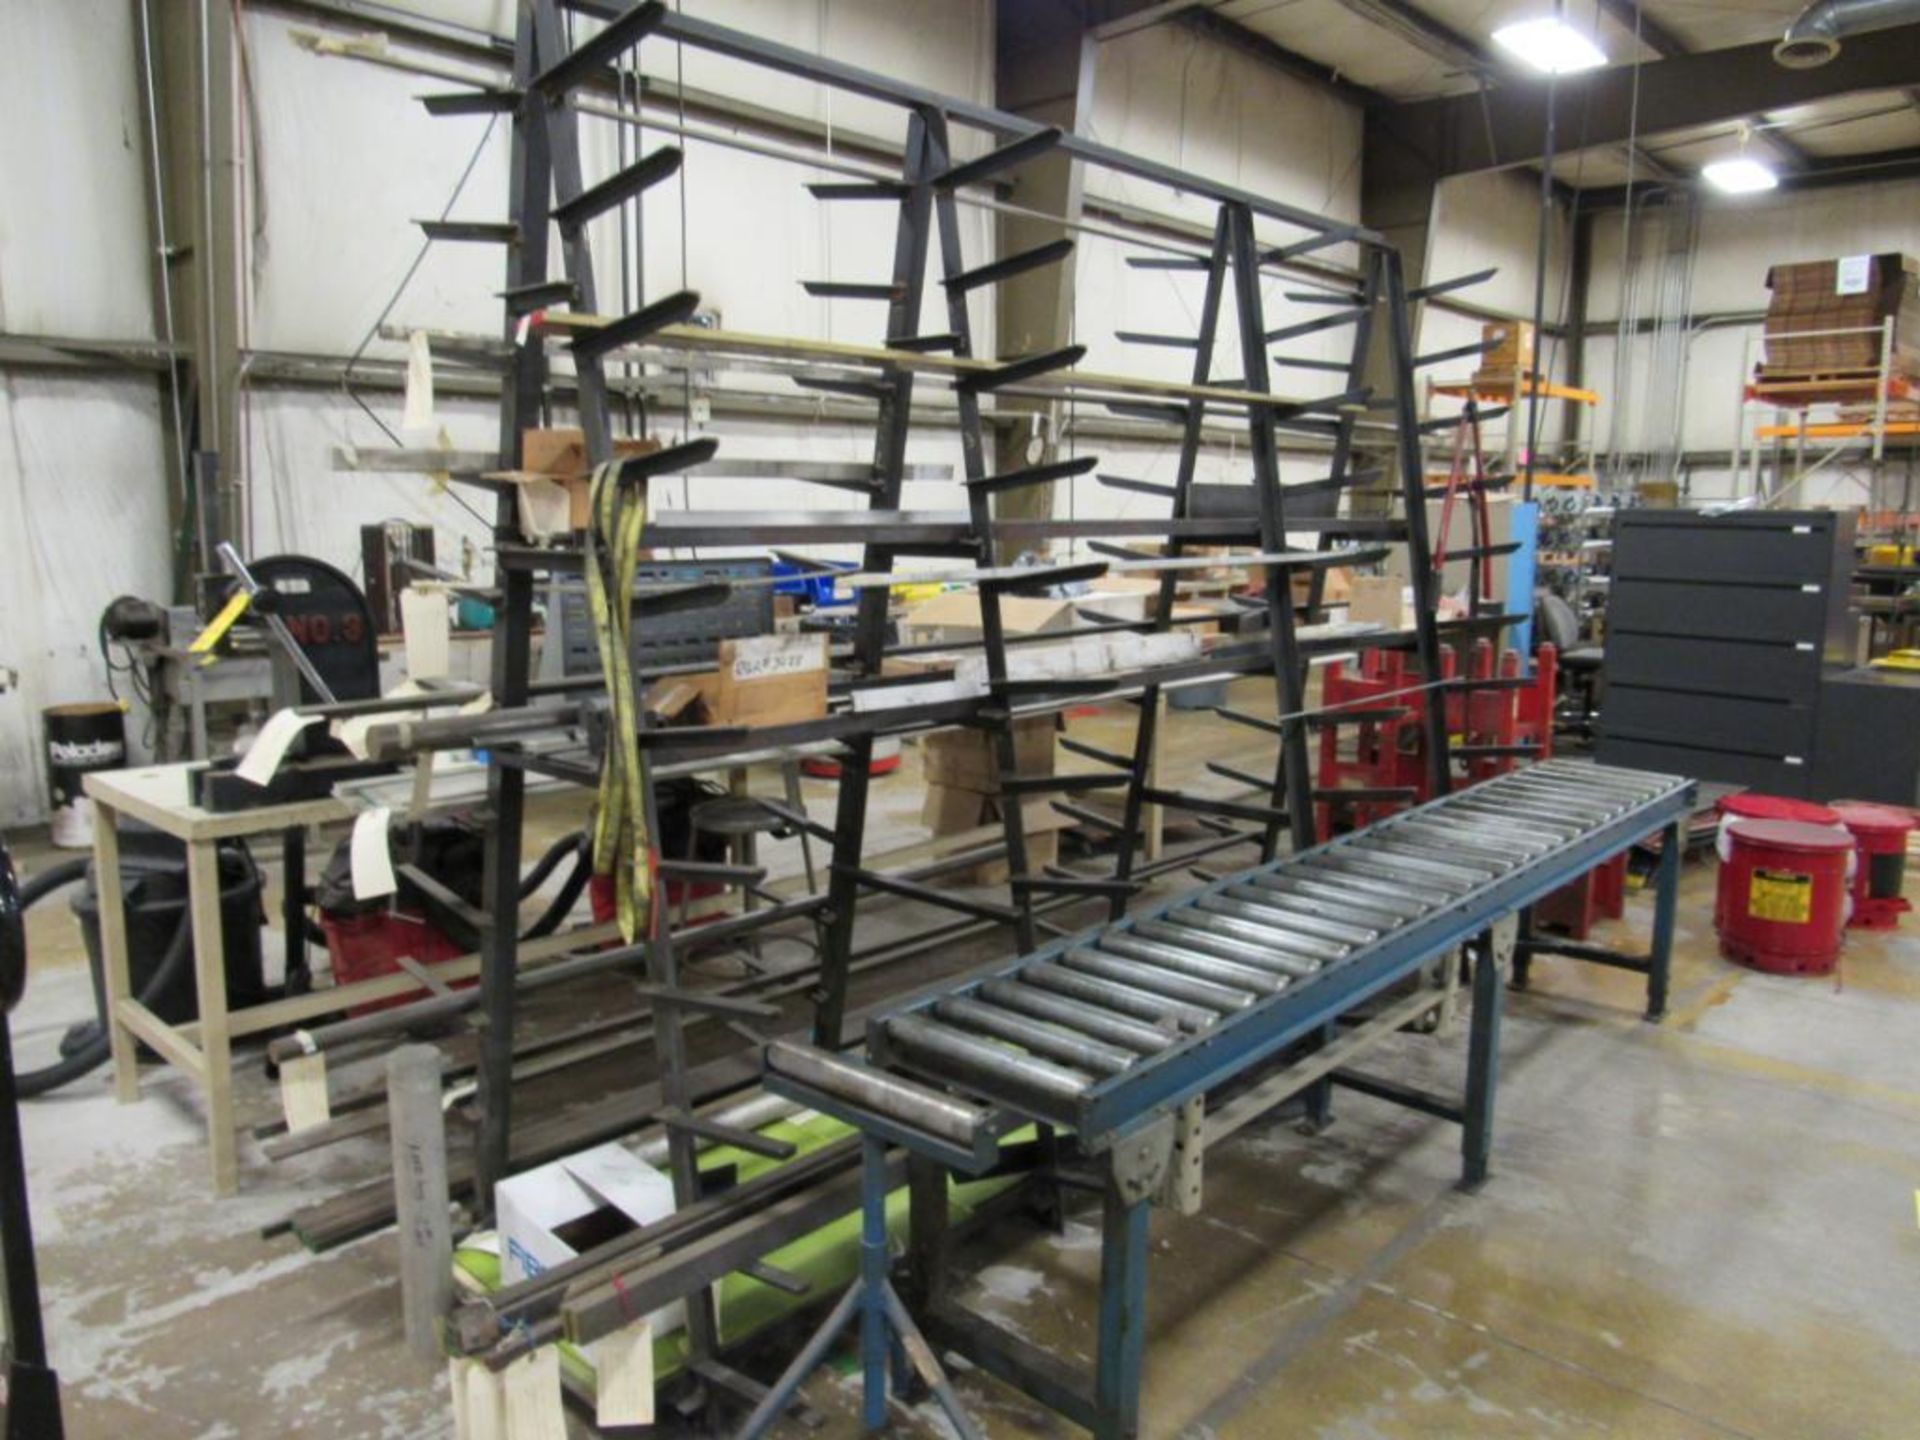 LOT: (1) A-Frame Bar Stock Rack (no contents), (1) 16 in. x 120 in. Long Roller Conveyor, (1) 16 in.